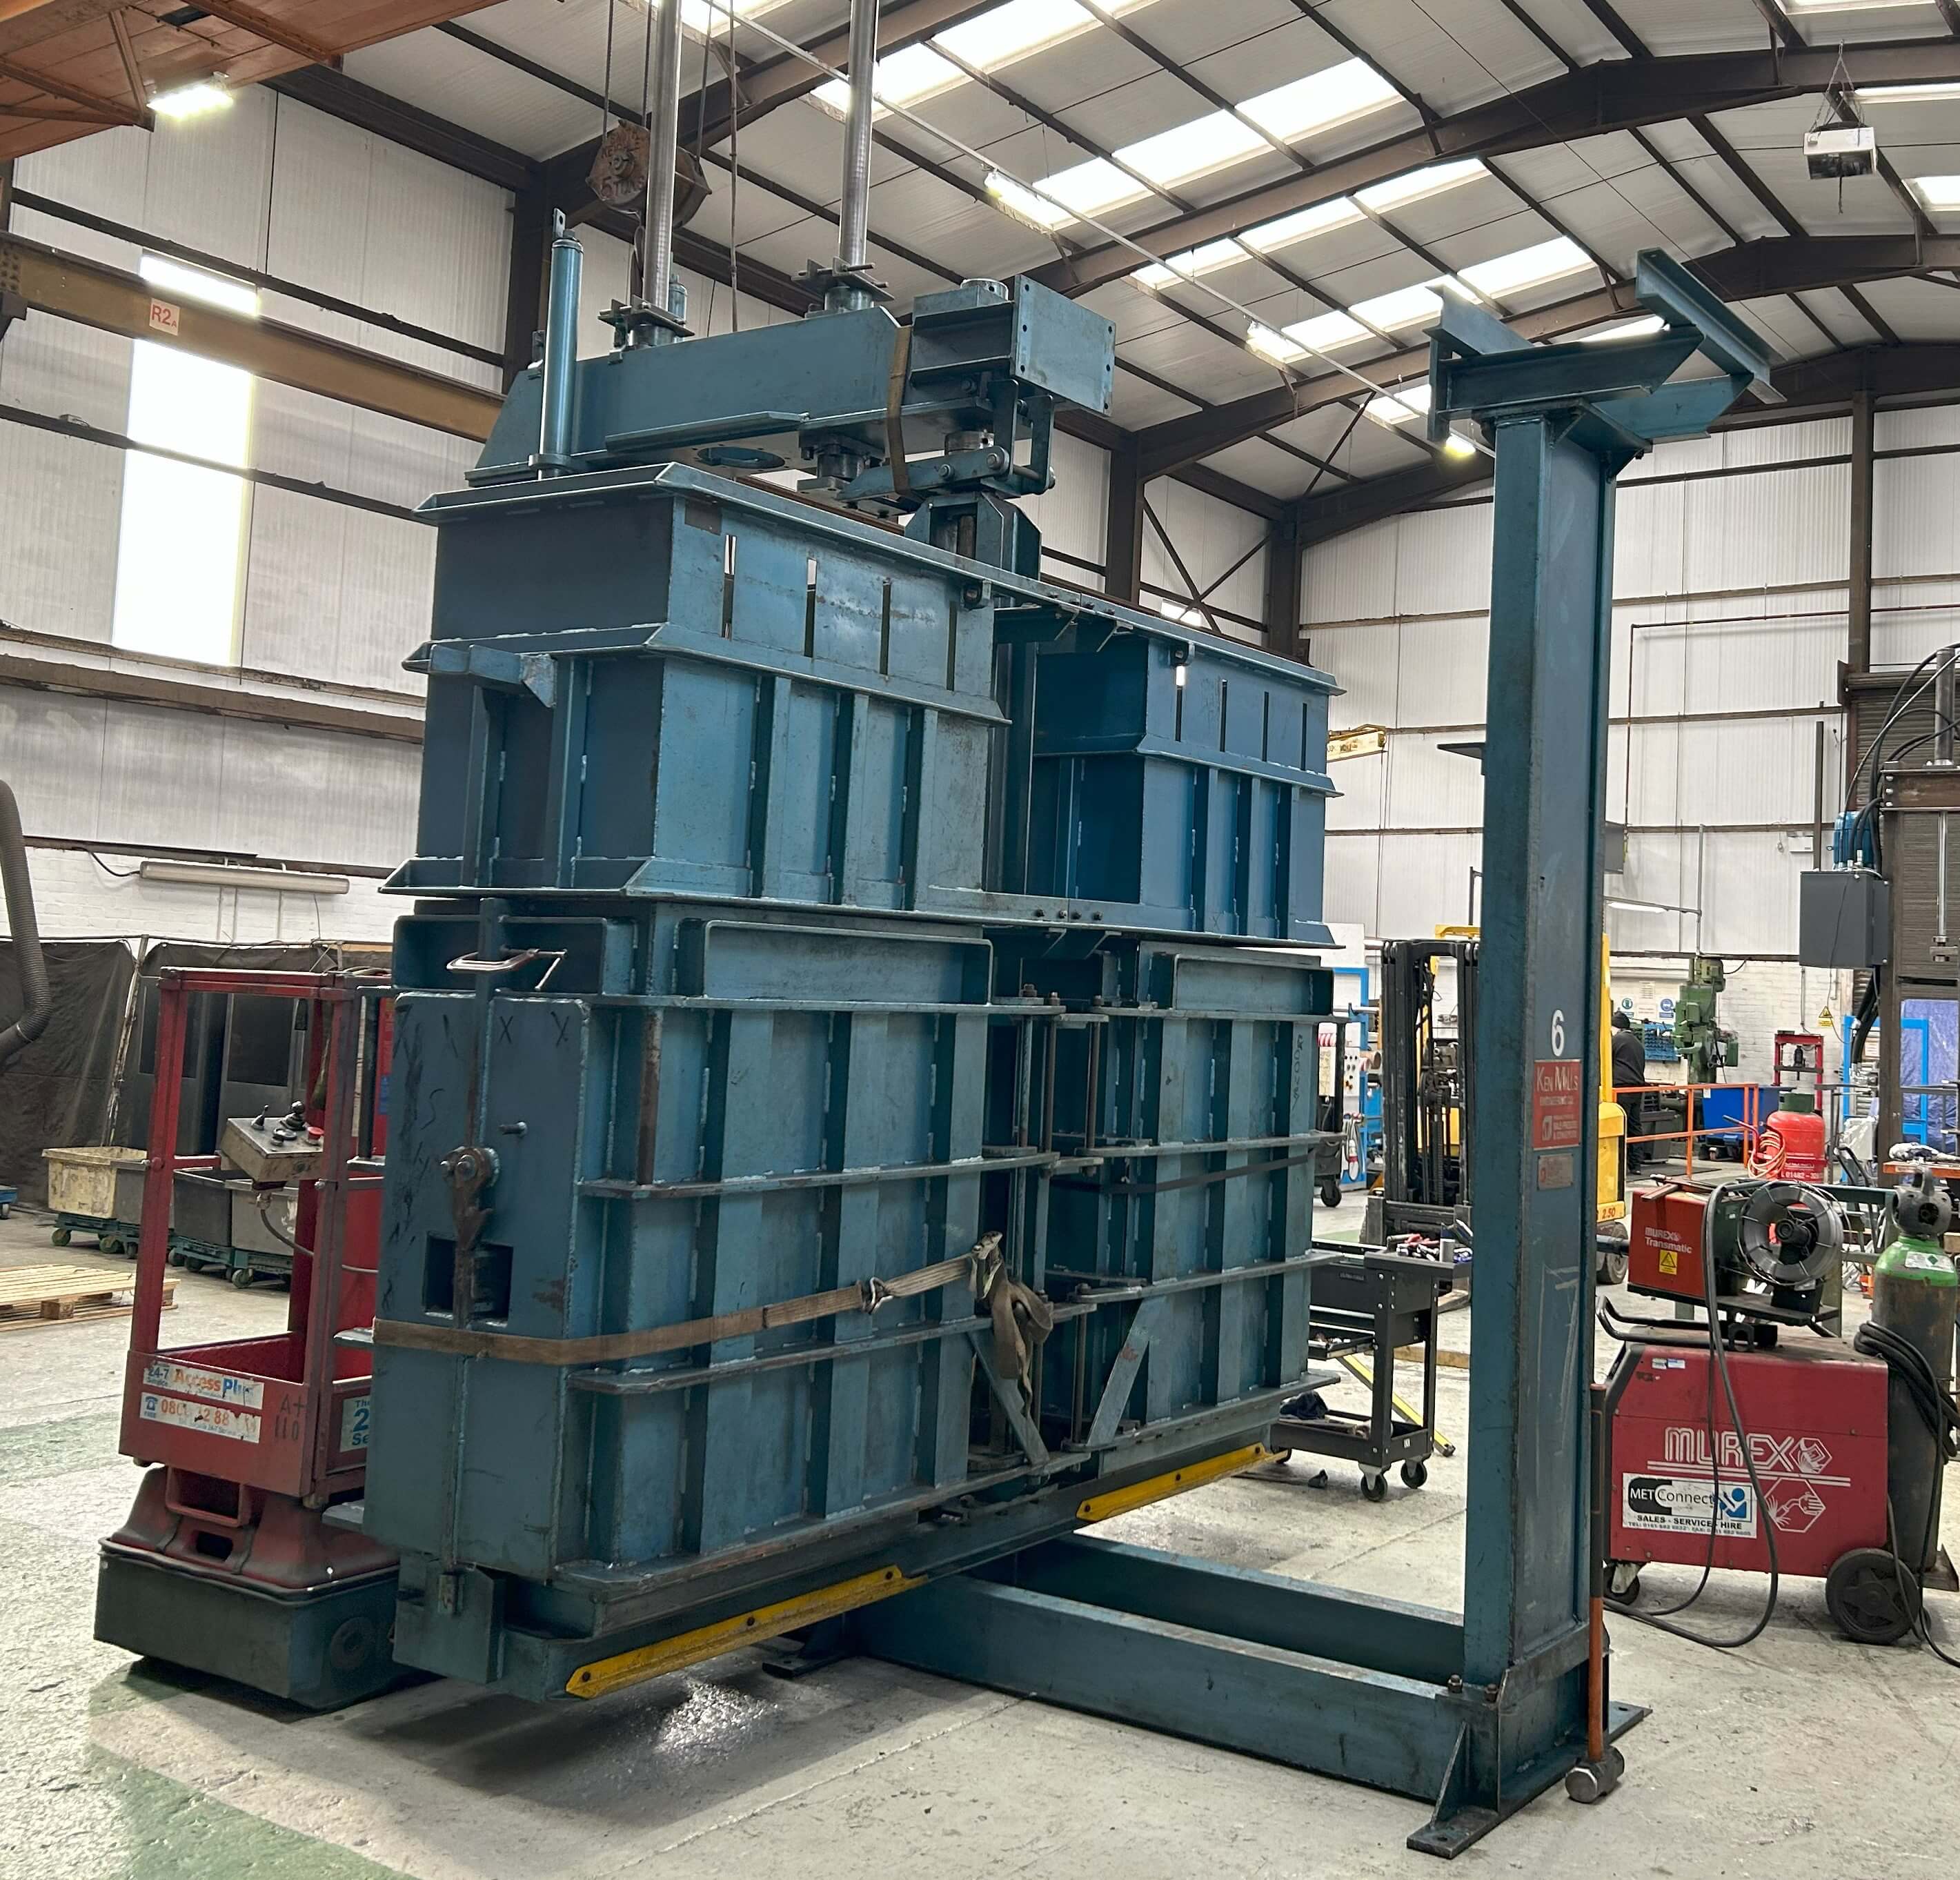 Refurbished baler services and solutions